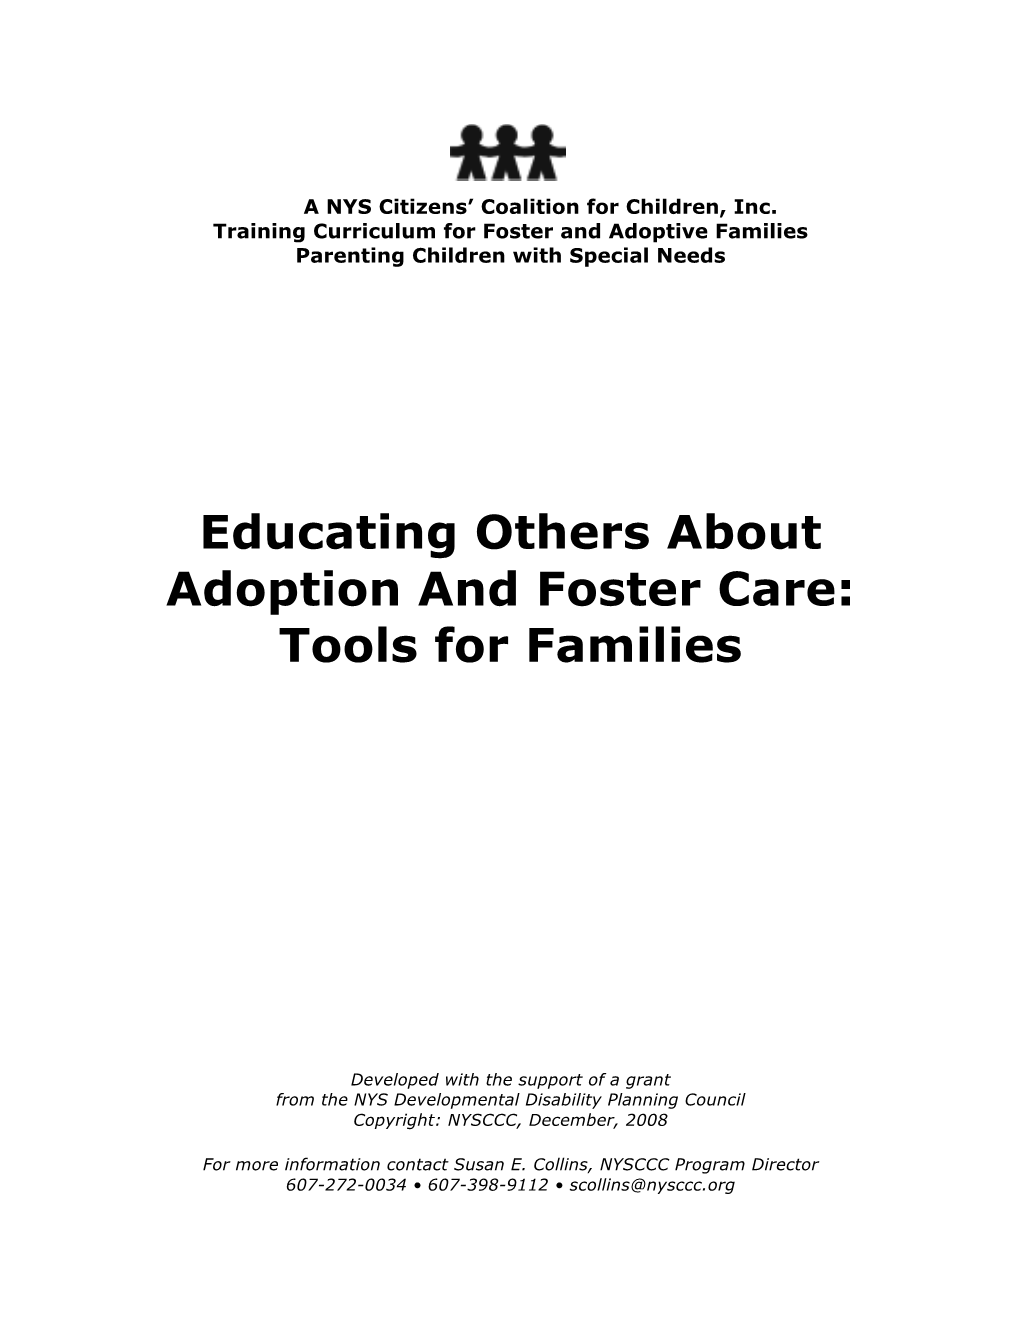 Educating Others About Adoption and Foster Care: Tools for Families